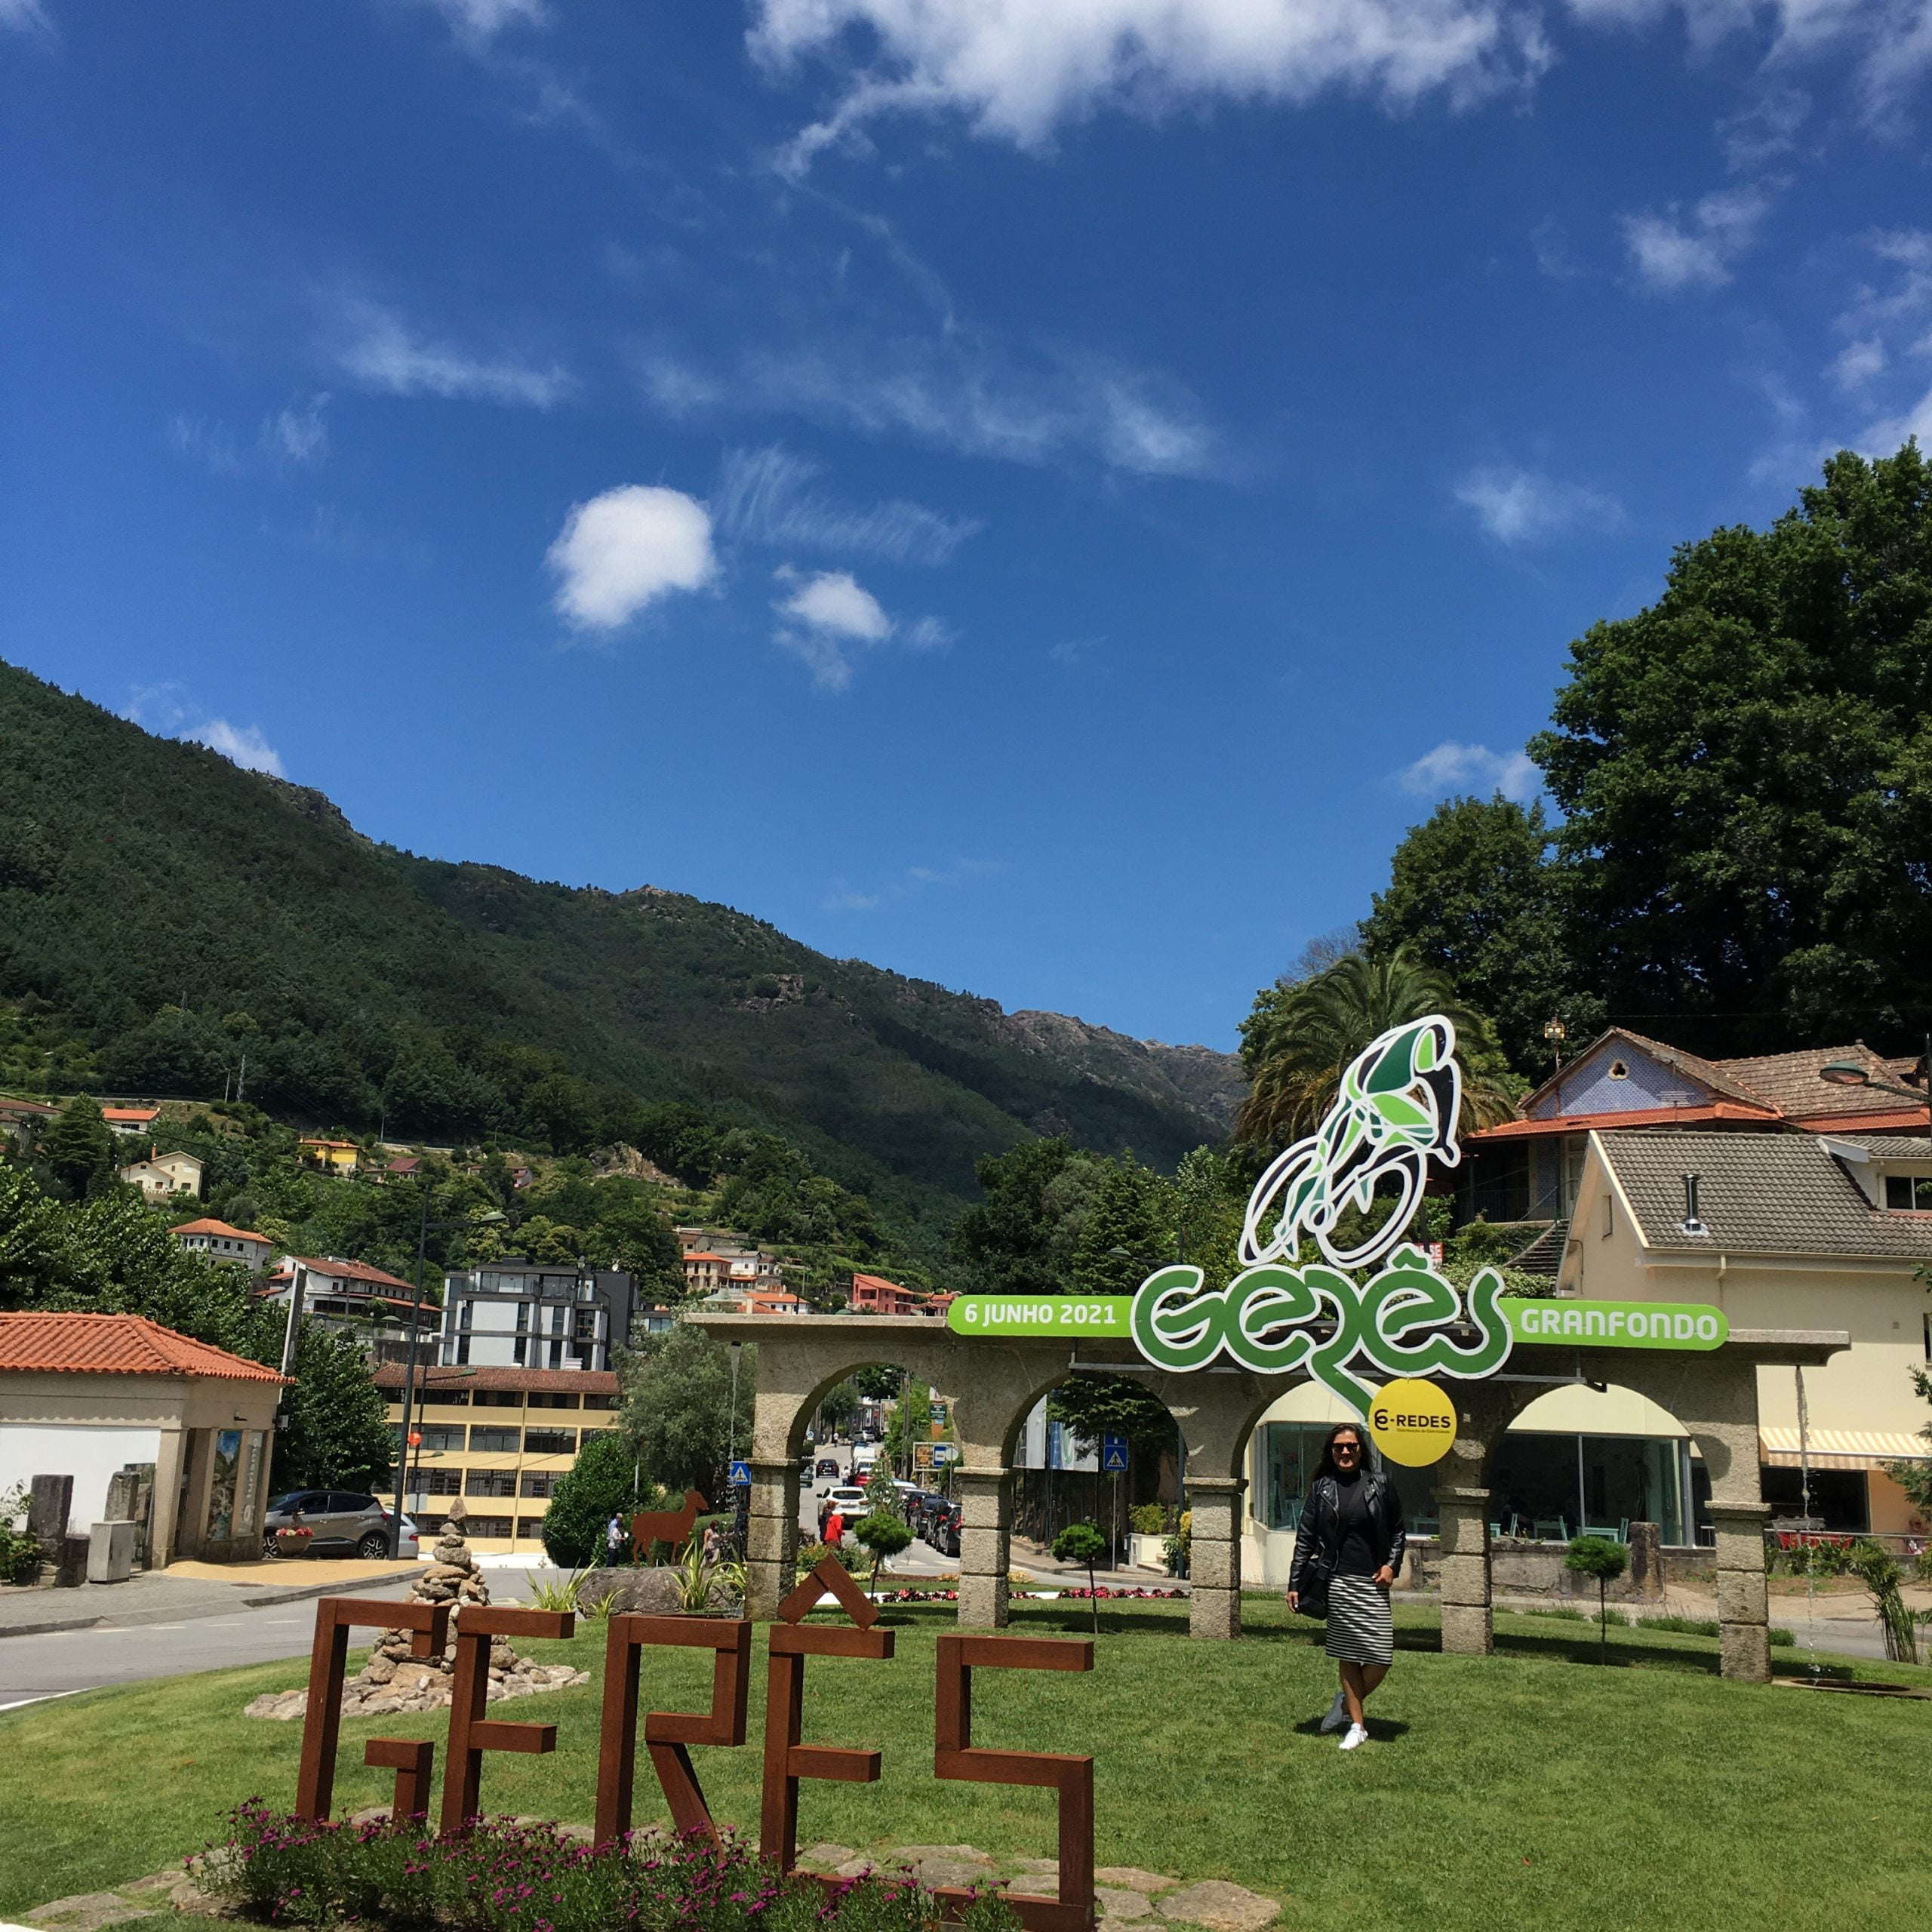 There is a lot to discover in Gerês